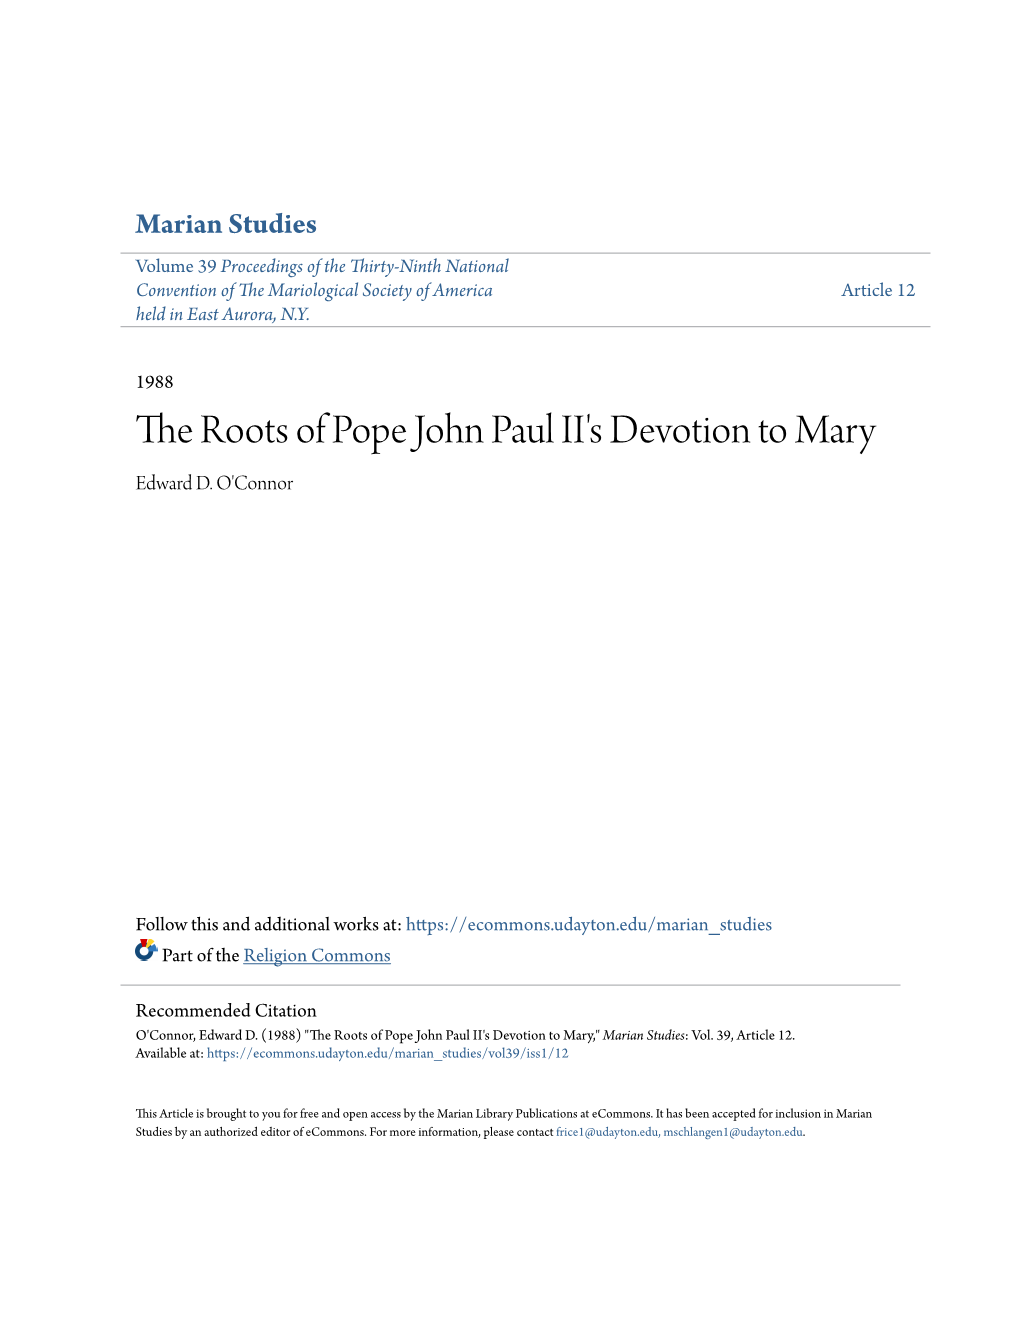 The Roots of Pope John Paul II's Devotion to Mary Edward D